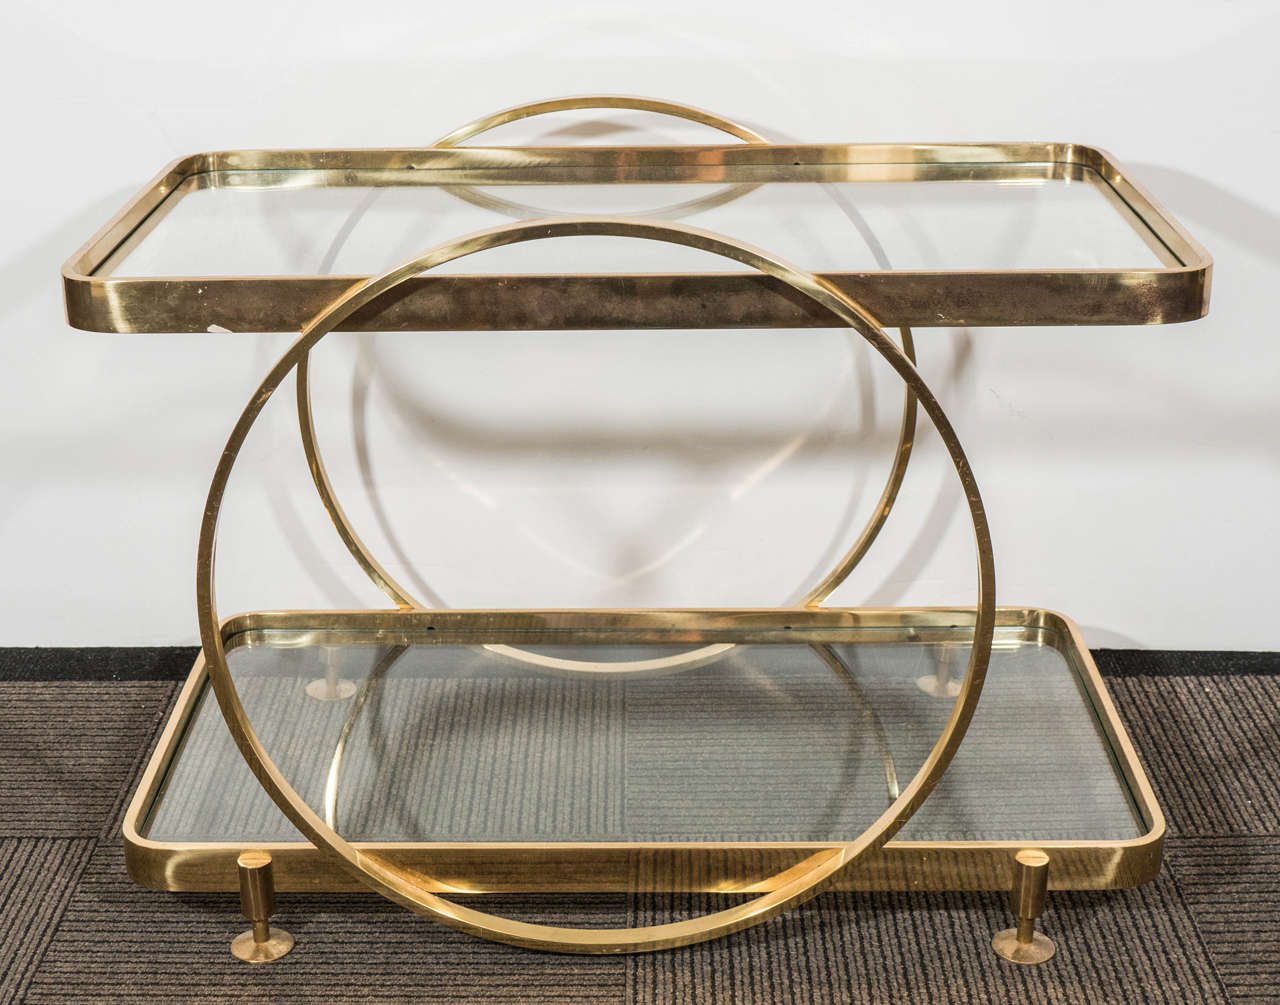 A vintage Italian two-tier serving or side table, in brass frame with glass inset shelves, supported by two flanking hoops and four circular brass feet. Good vintage condition with some age appropriate wear and minor scratches to the brass surface.